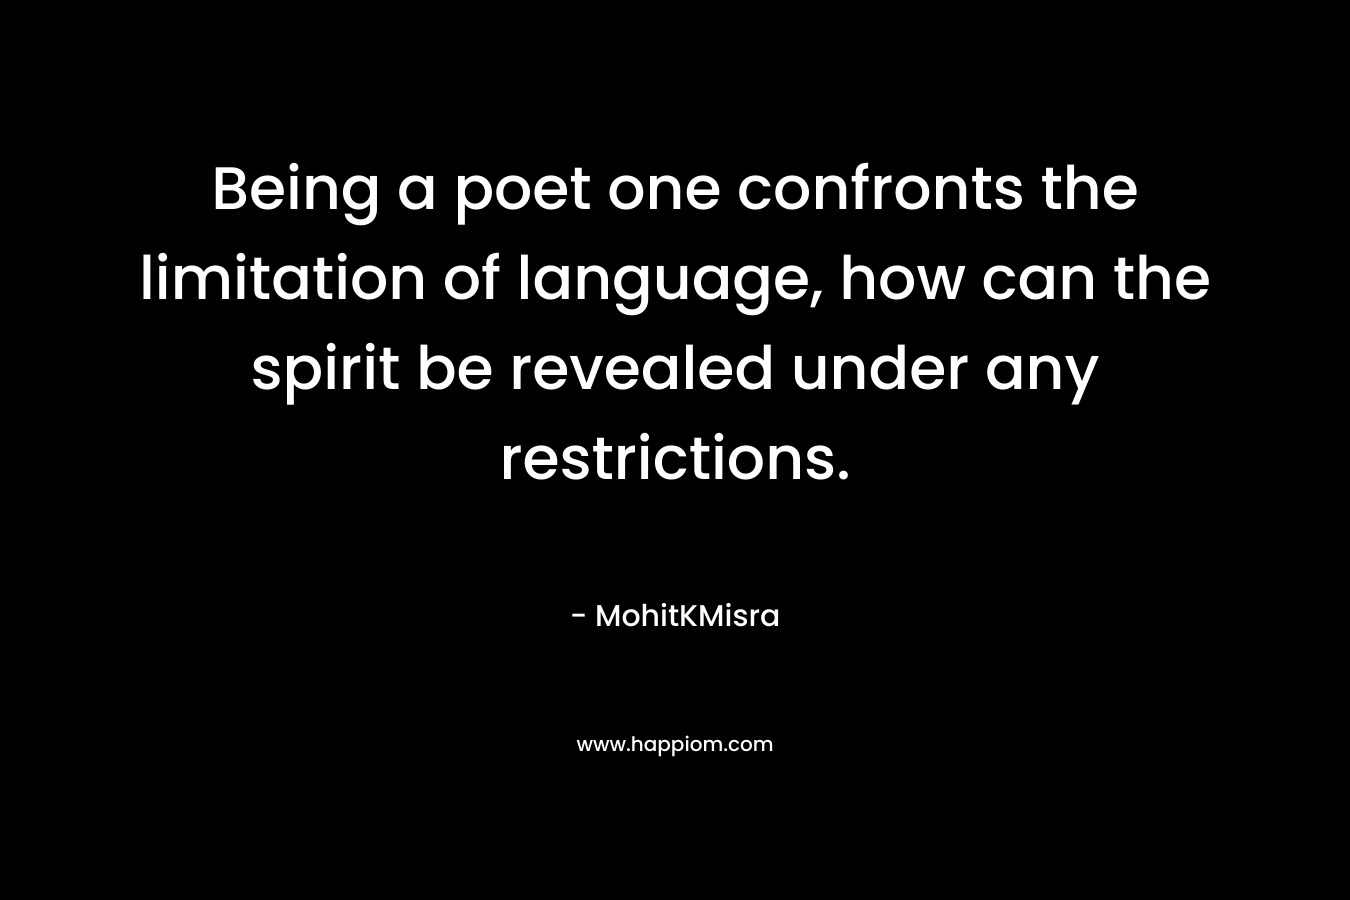 Being a poet one confronts the limitation of language, how can the spirit be revealed under any restrictions. – MohitKMisra